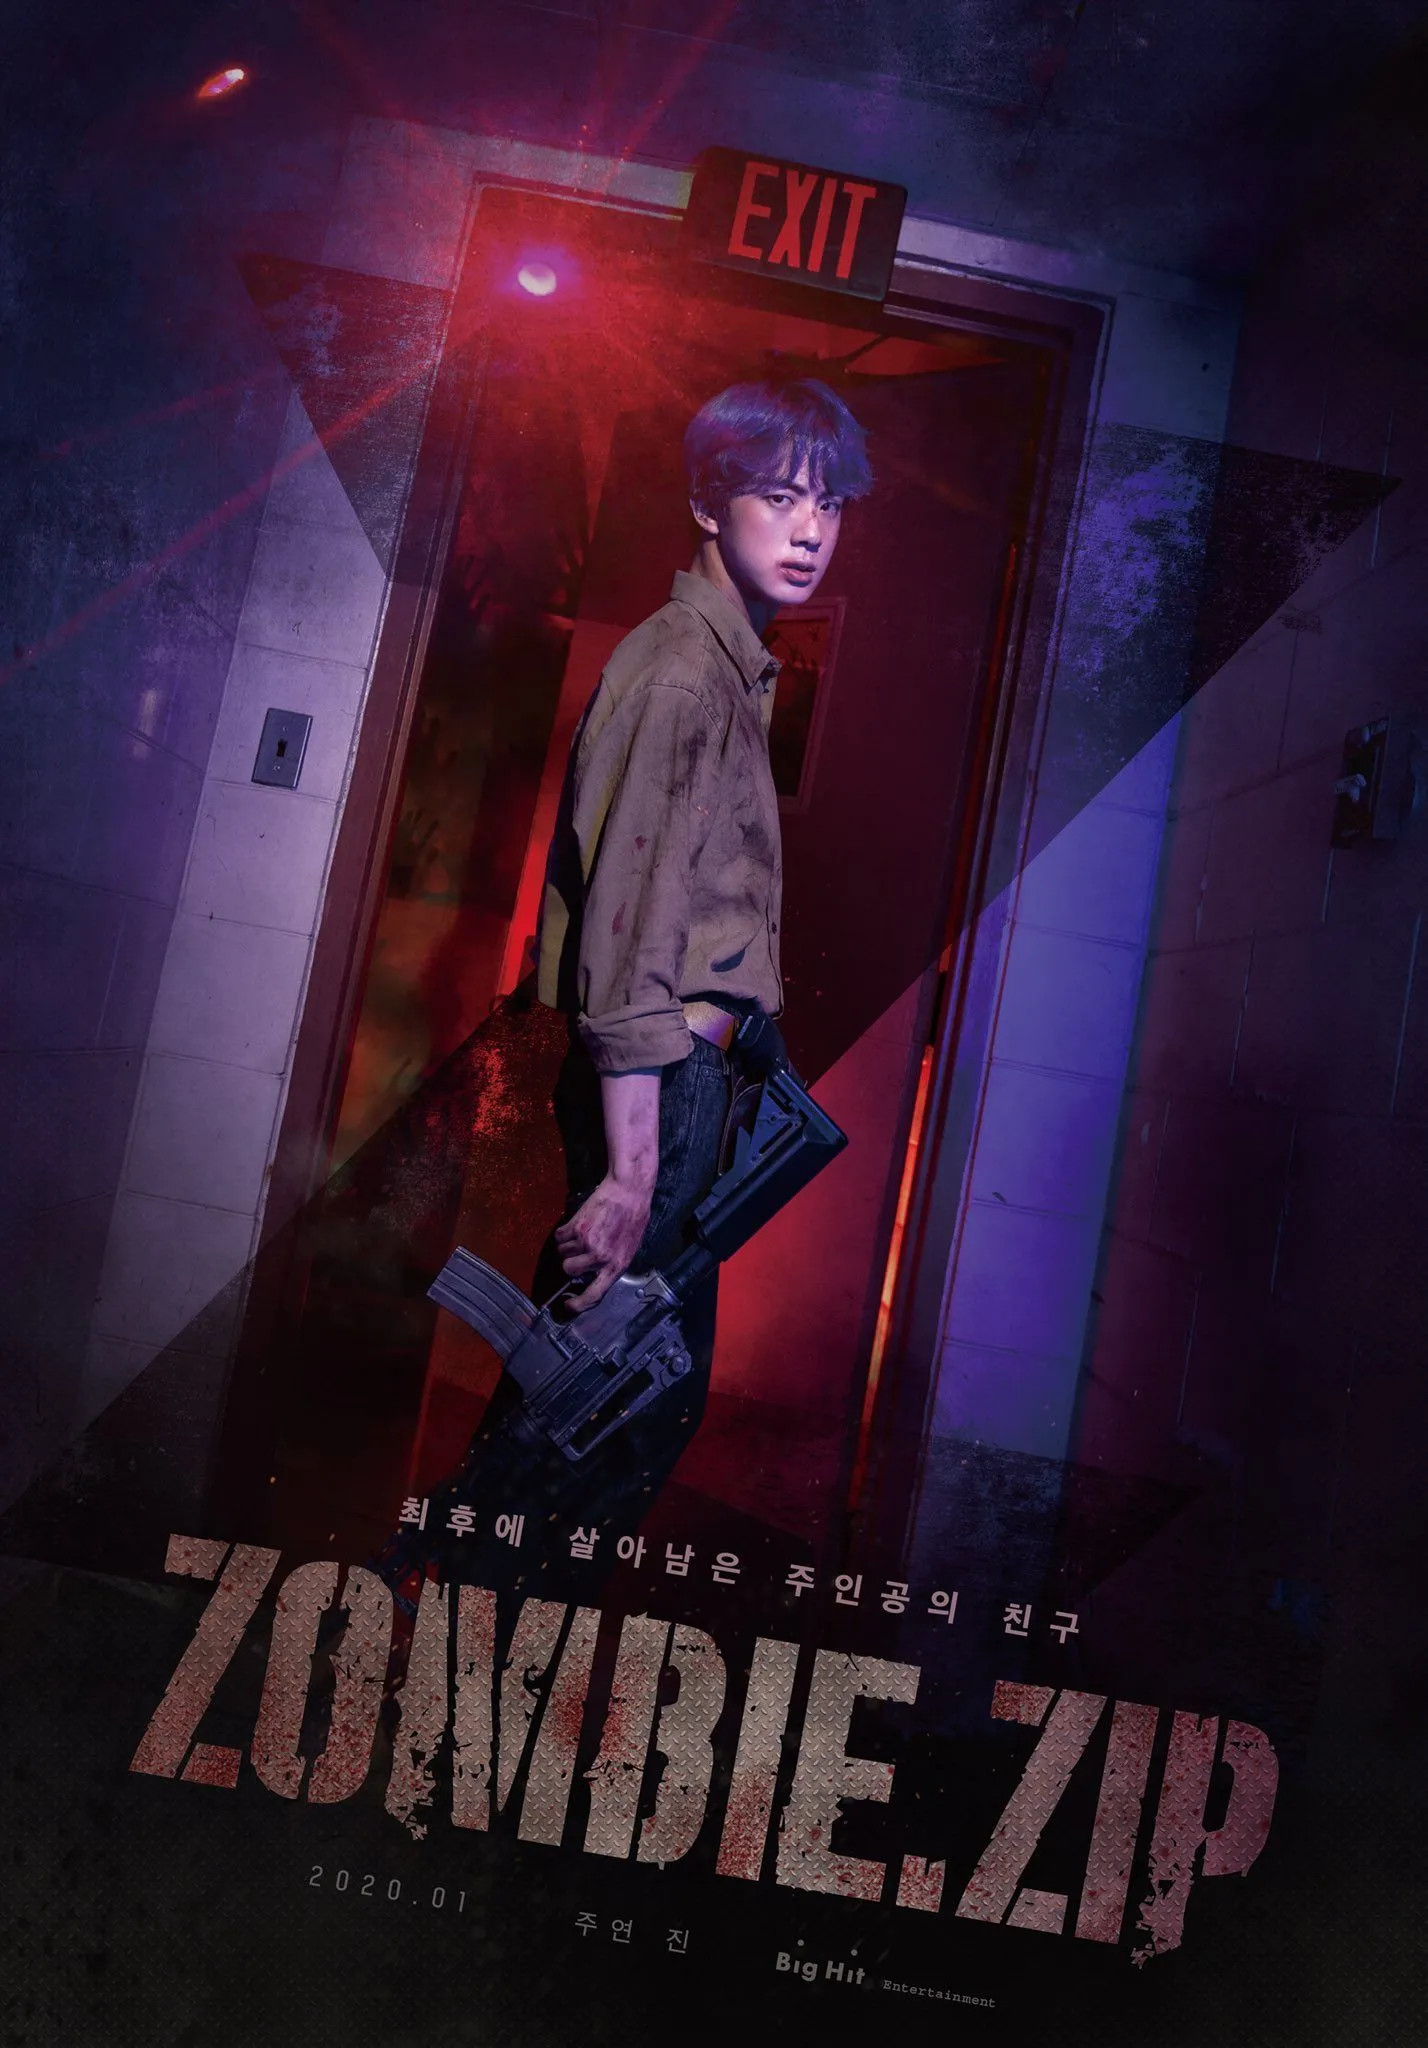 6th ARMY ZIP」 BTS Cinema Interview & Gallery // “ZOMBIE.ZIP” by